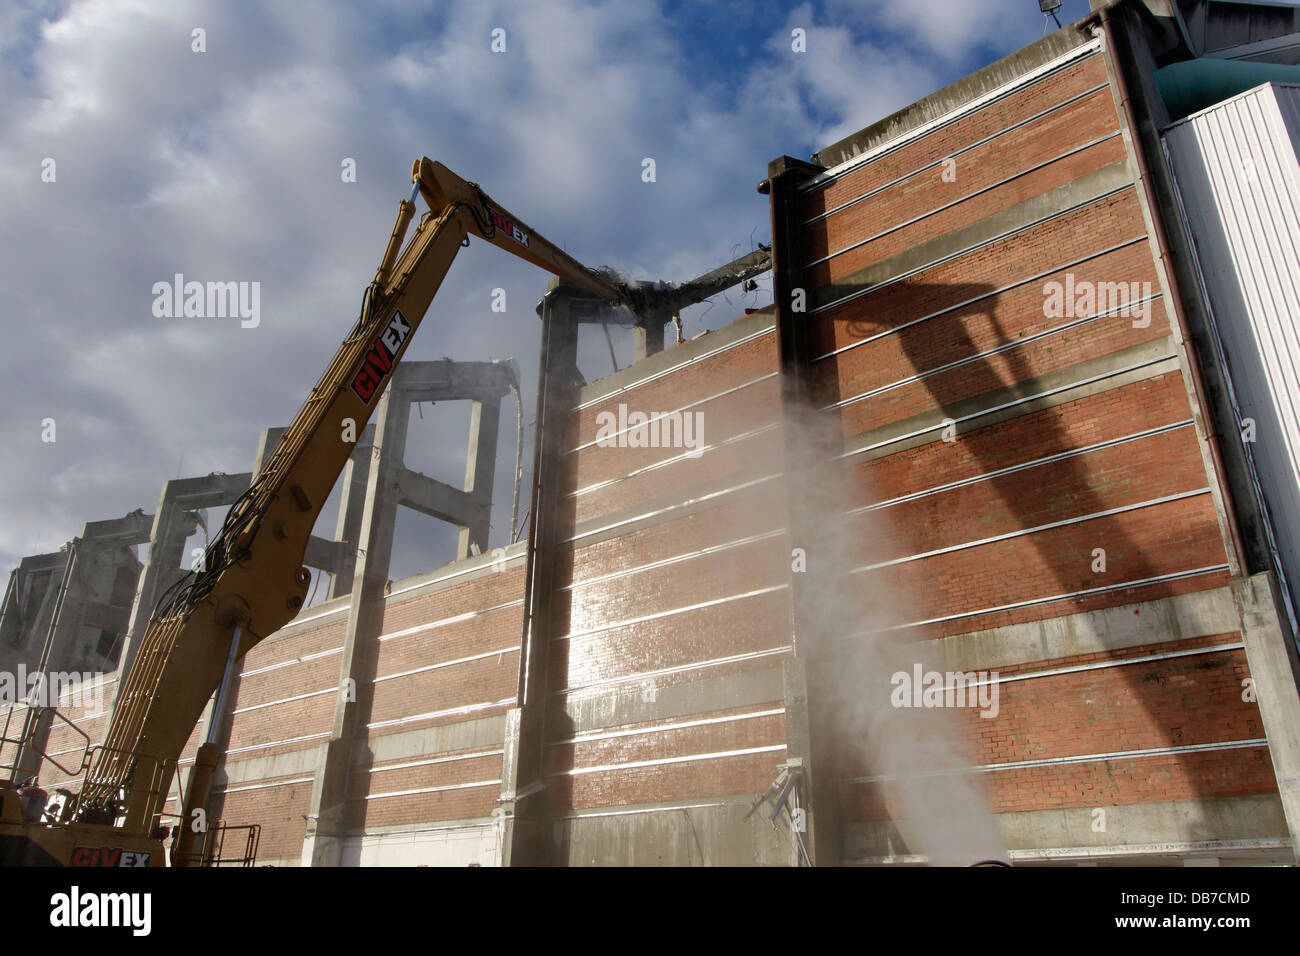 Demolition of the Perth Superdome building in July/ August 2013, Western Australia Stock Photo